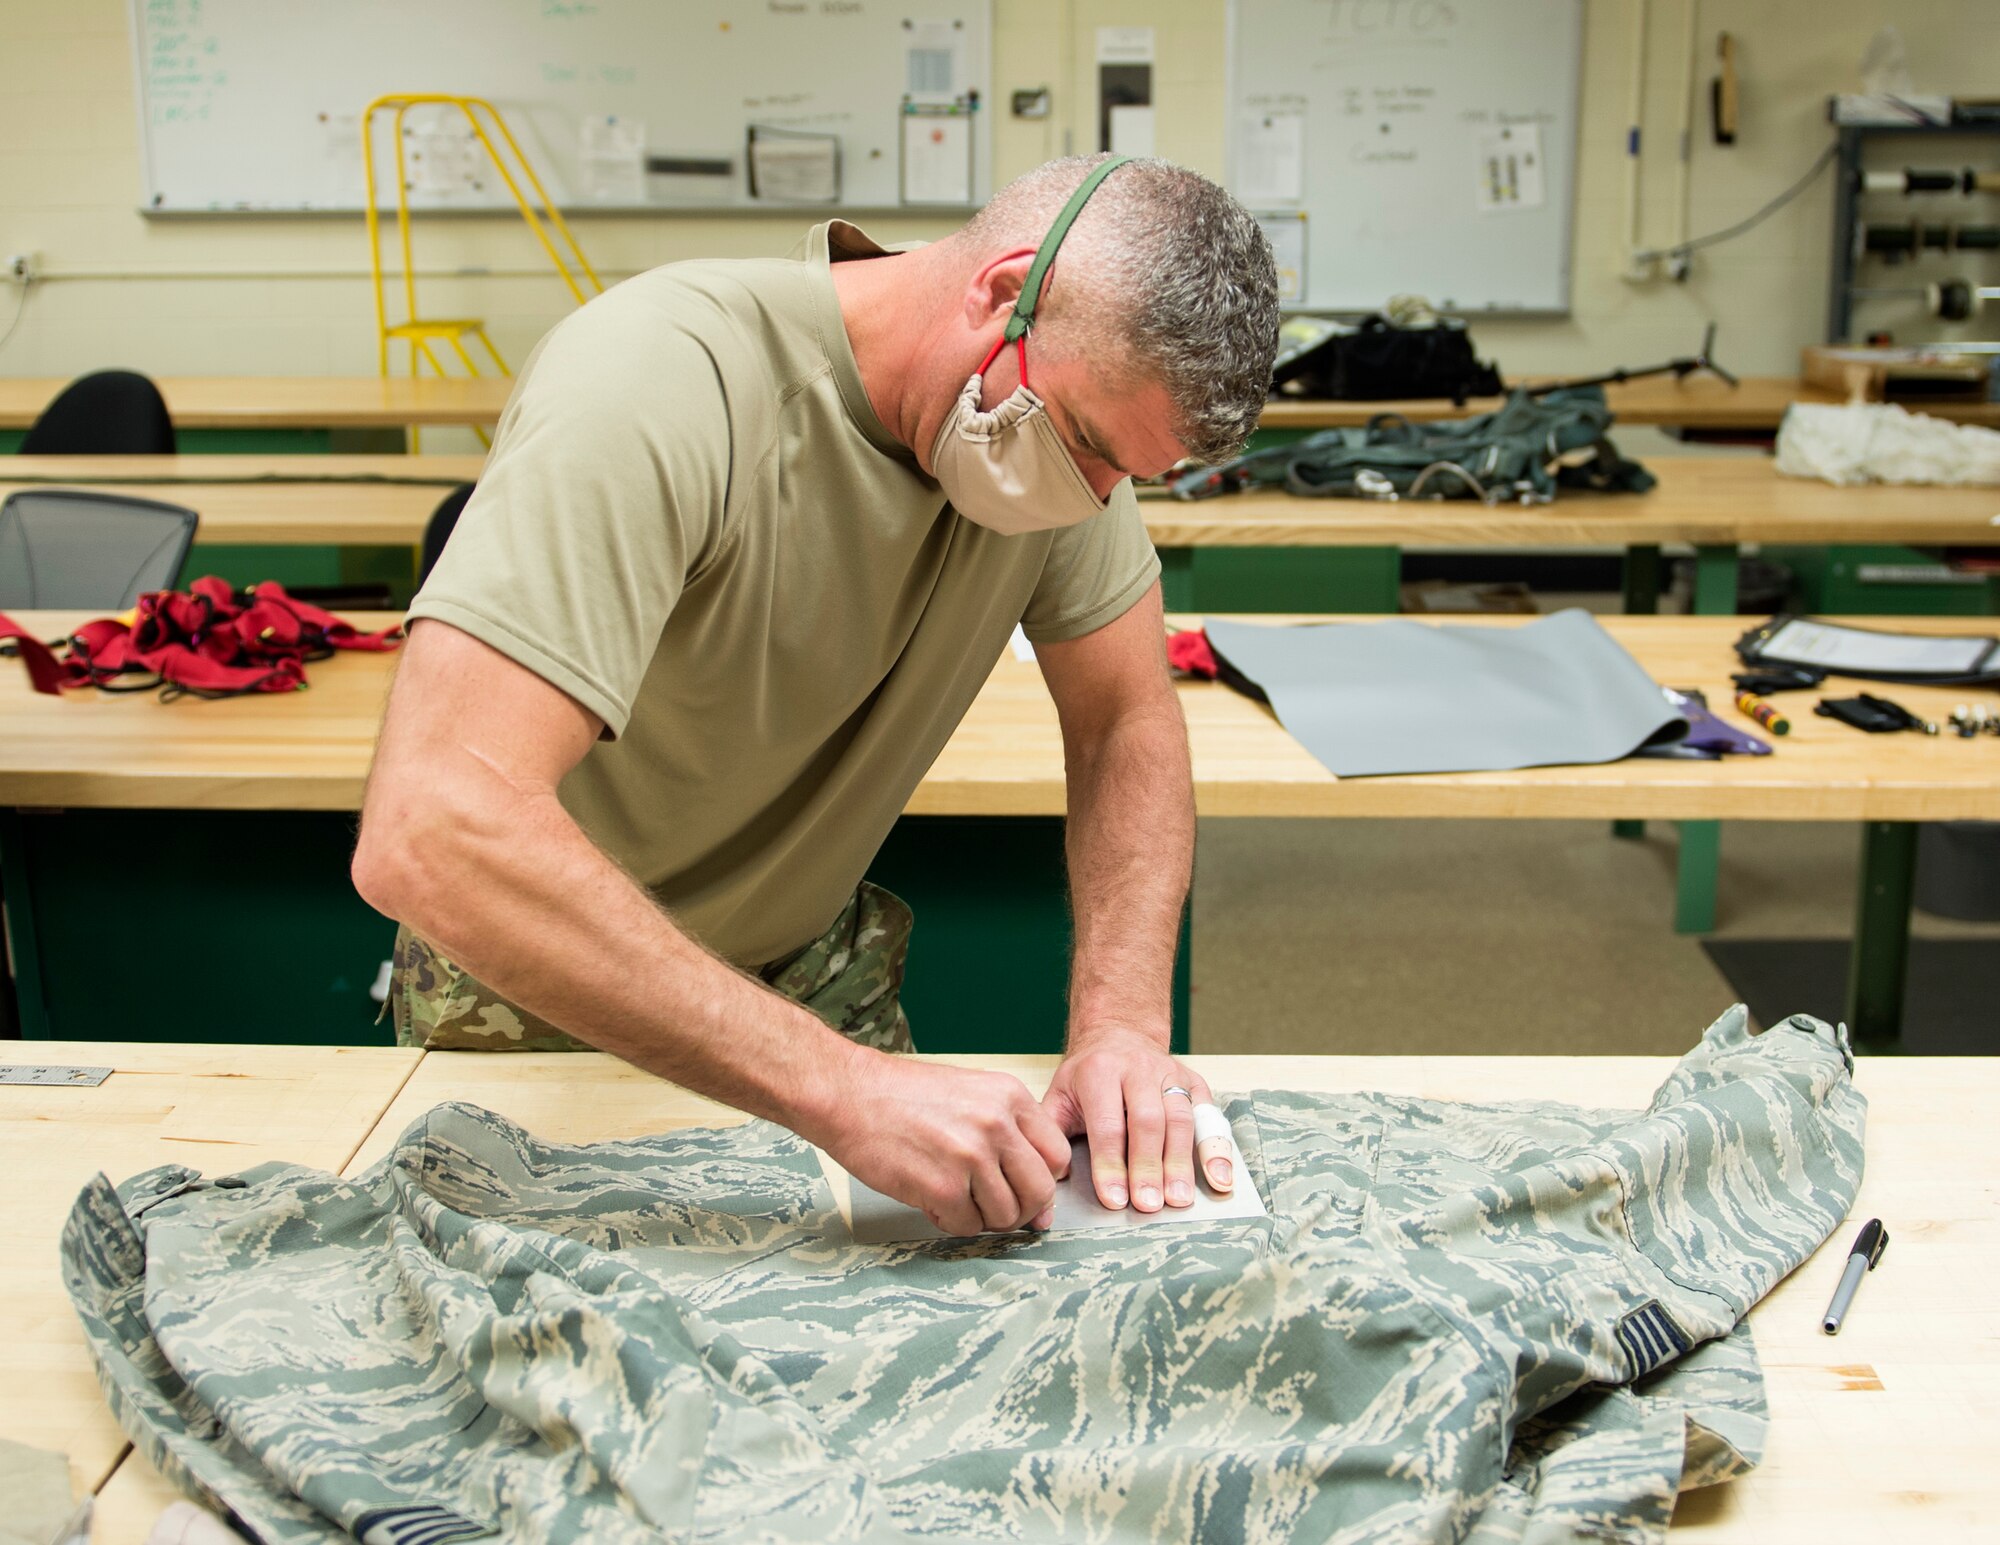 U.S. Air Force Airmen from the 133rd Operation Support Squadron’s aircrew flight equipment shop make masks for base personal in St. Paul, Minn., Apr. 8, 2020.